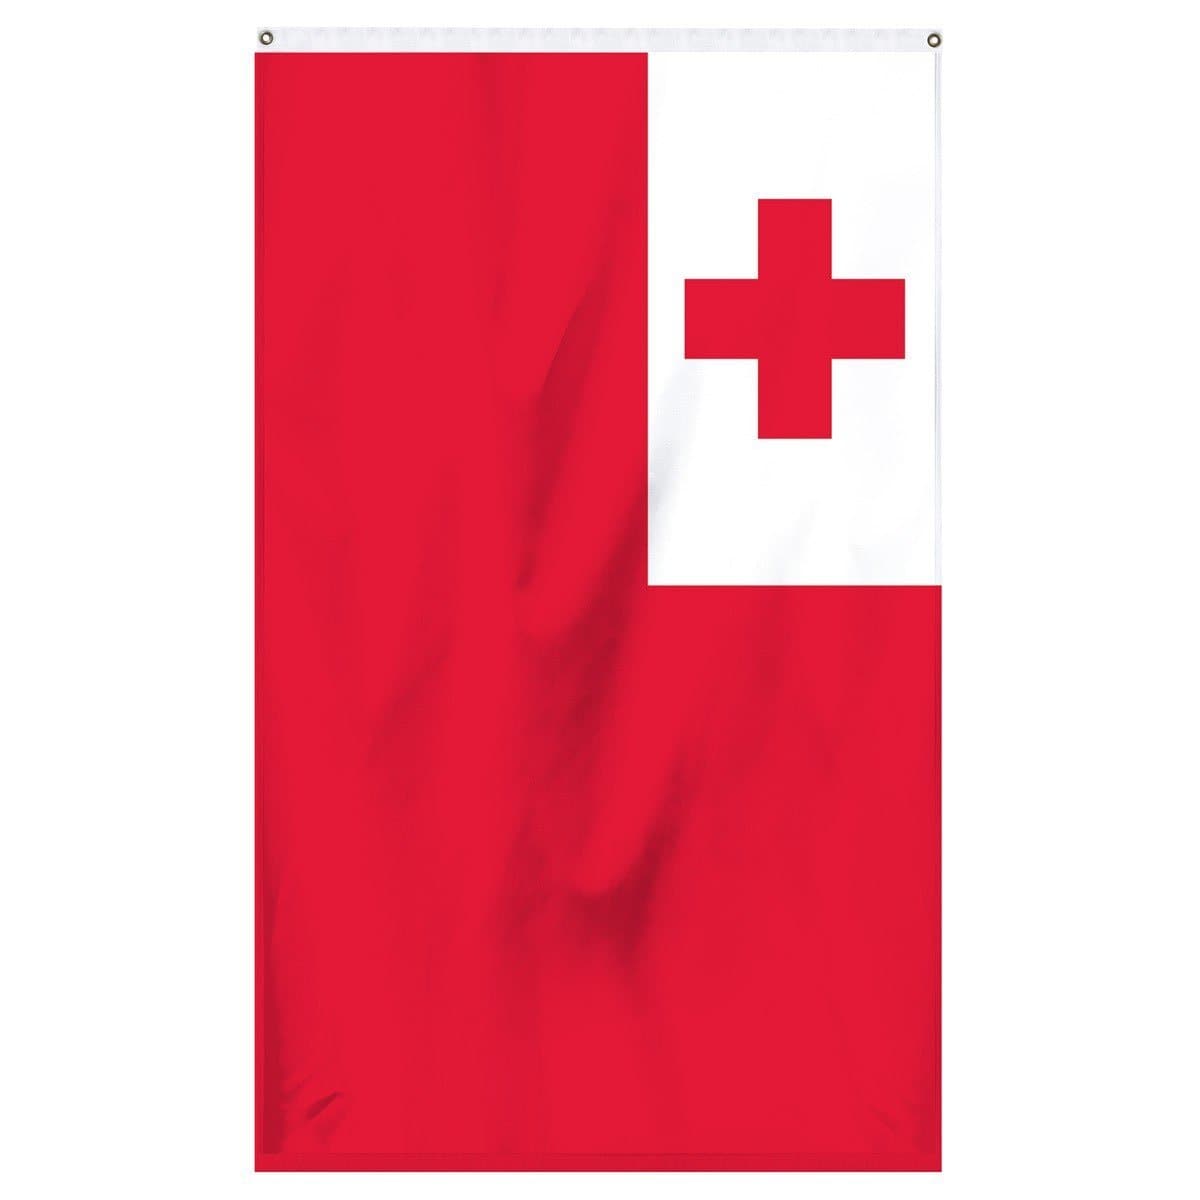 Tonga National Flag for sale to buy online from Atlantic Flag and Pole. Red flag with a white square and a red cross in the corner.